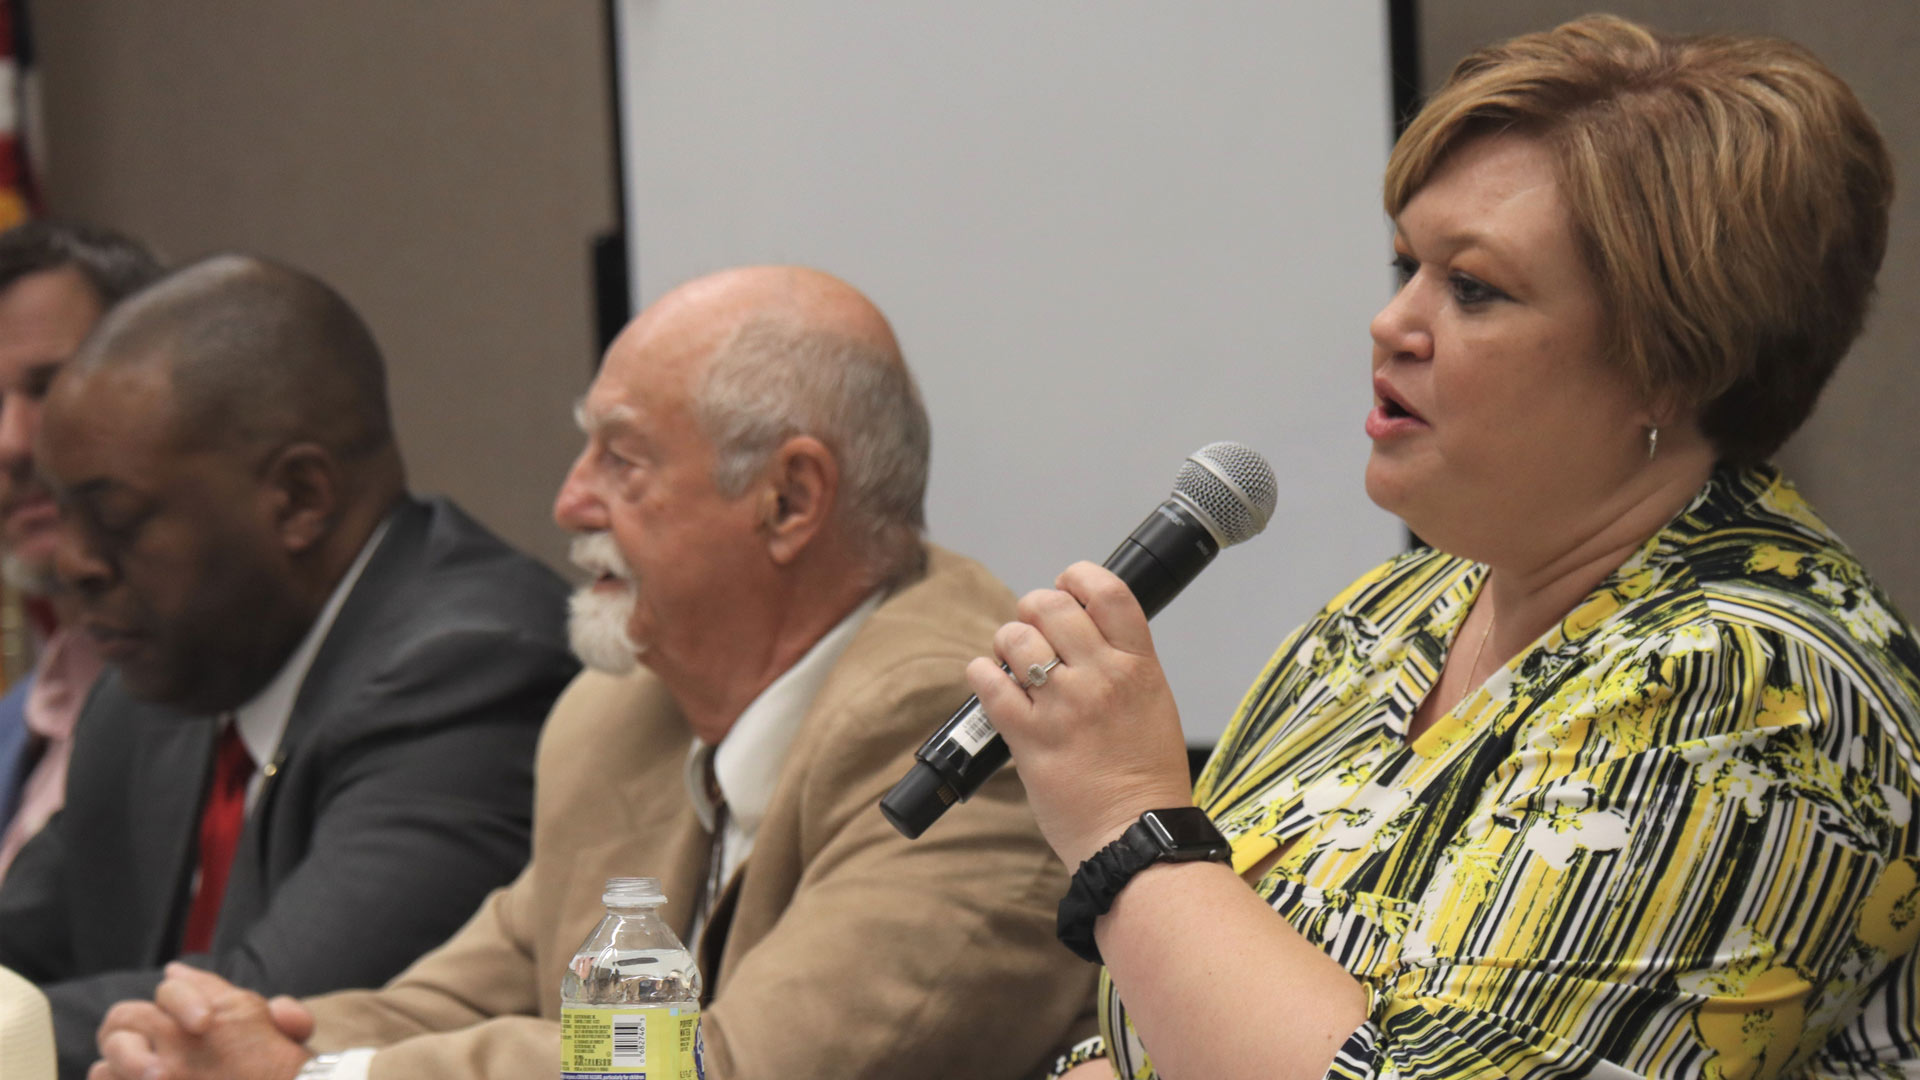 The candidates for Mayor of Sierra Vista participate in a debate. October 2022